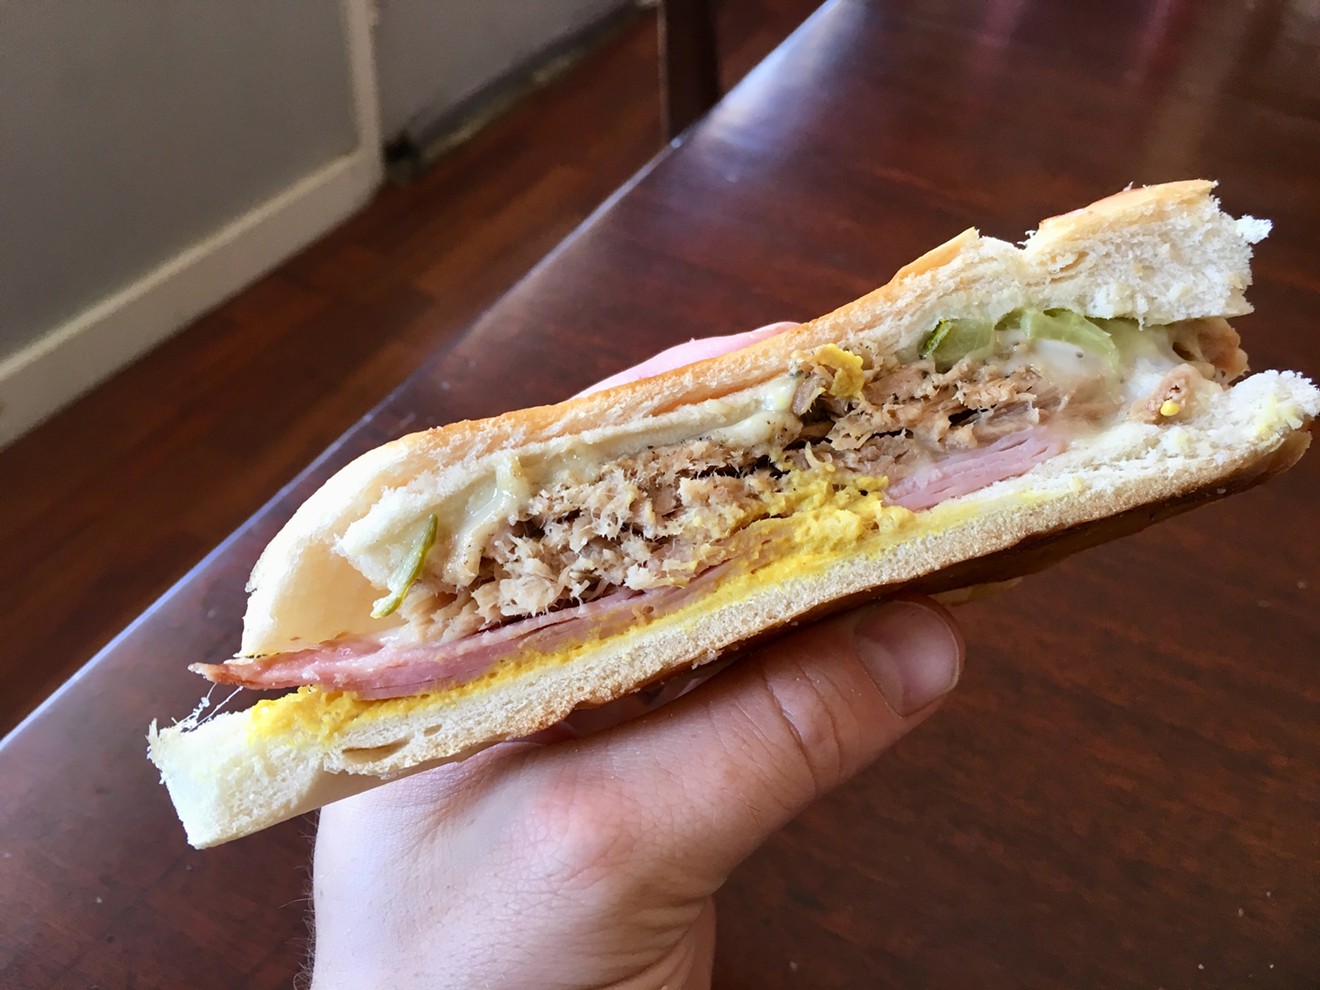 The Cuban at the Dulceria International Bakery has been one of Dallas' best sandwiches for decades.